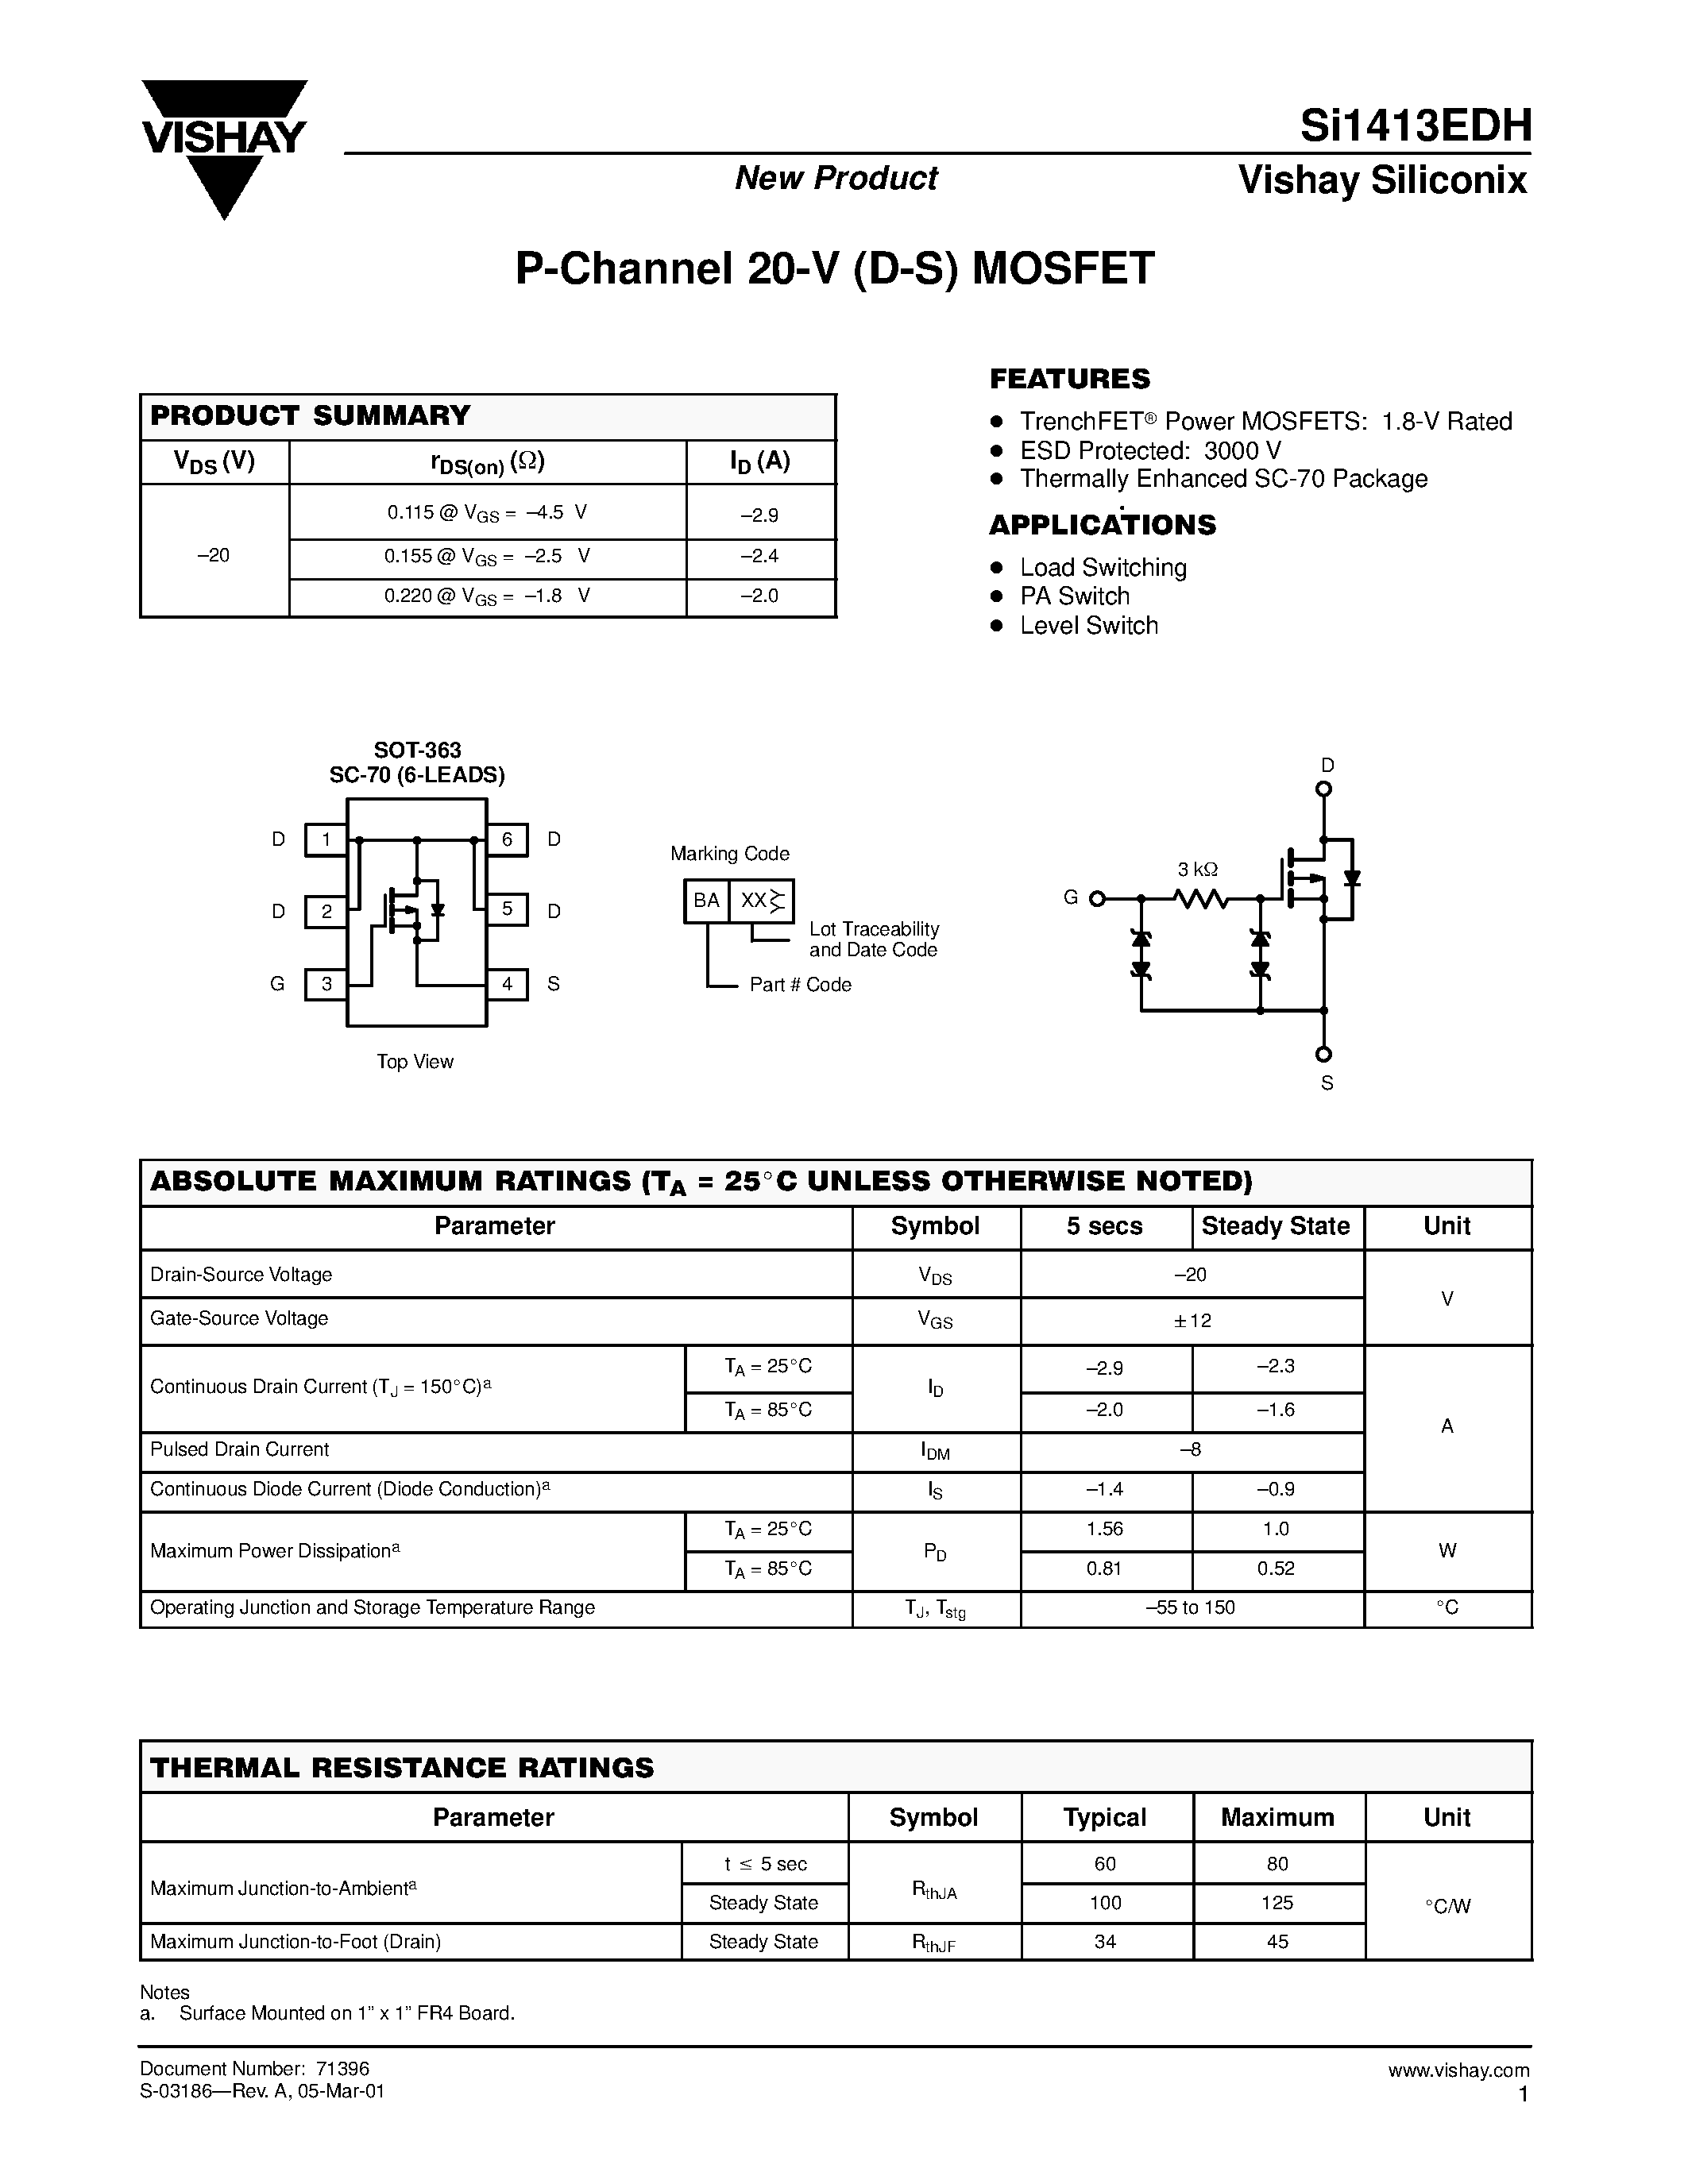 Datasheet SI1413EDH - P-Channel 20-V (D-S) MOSFET page 1